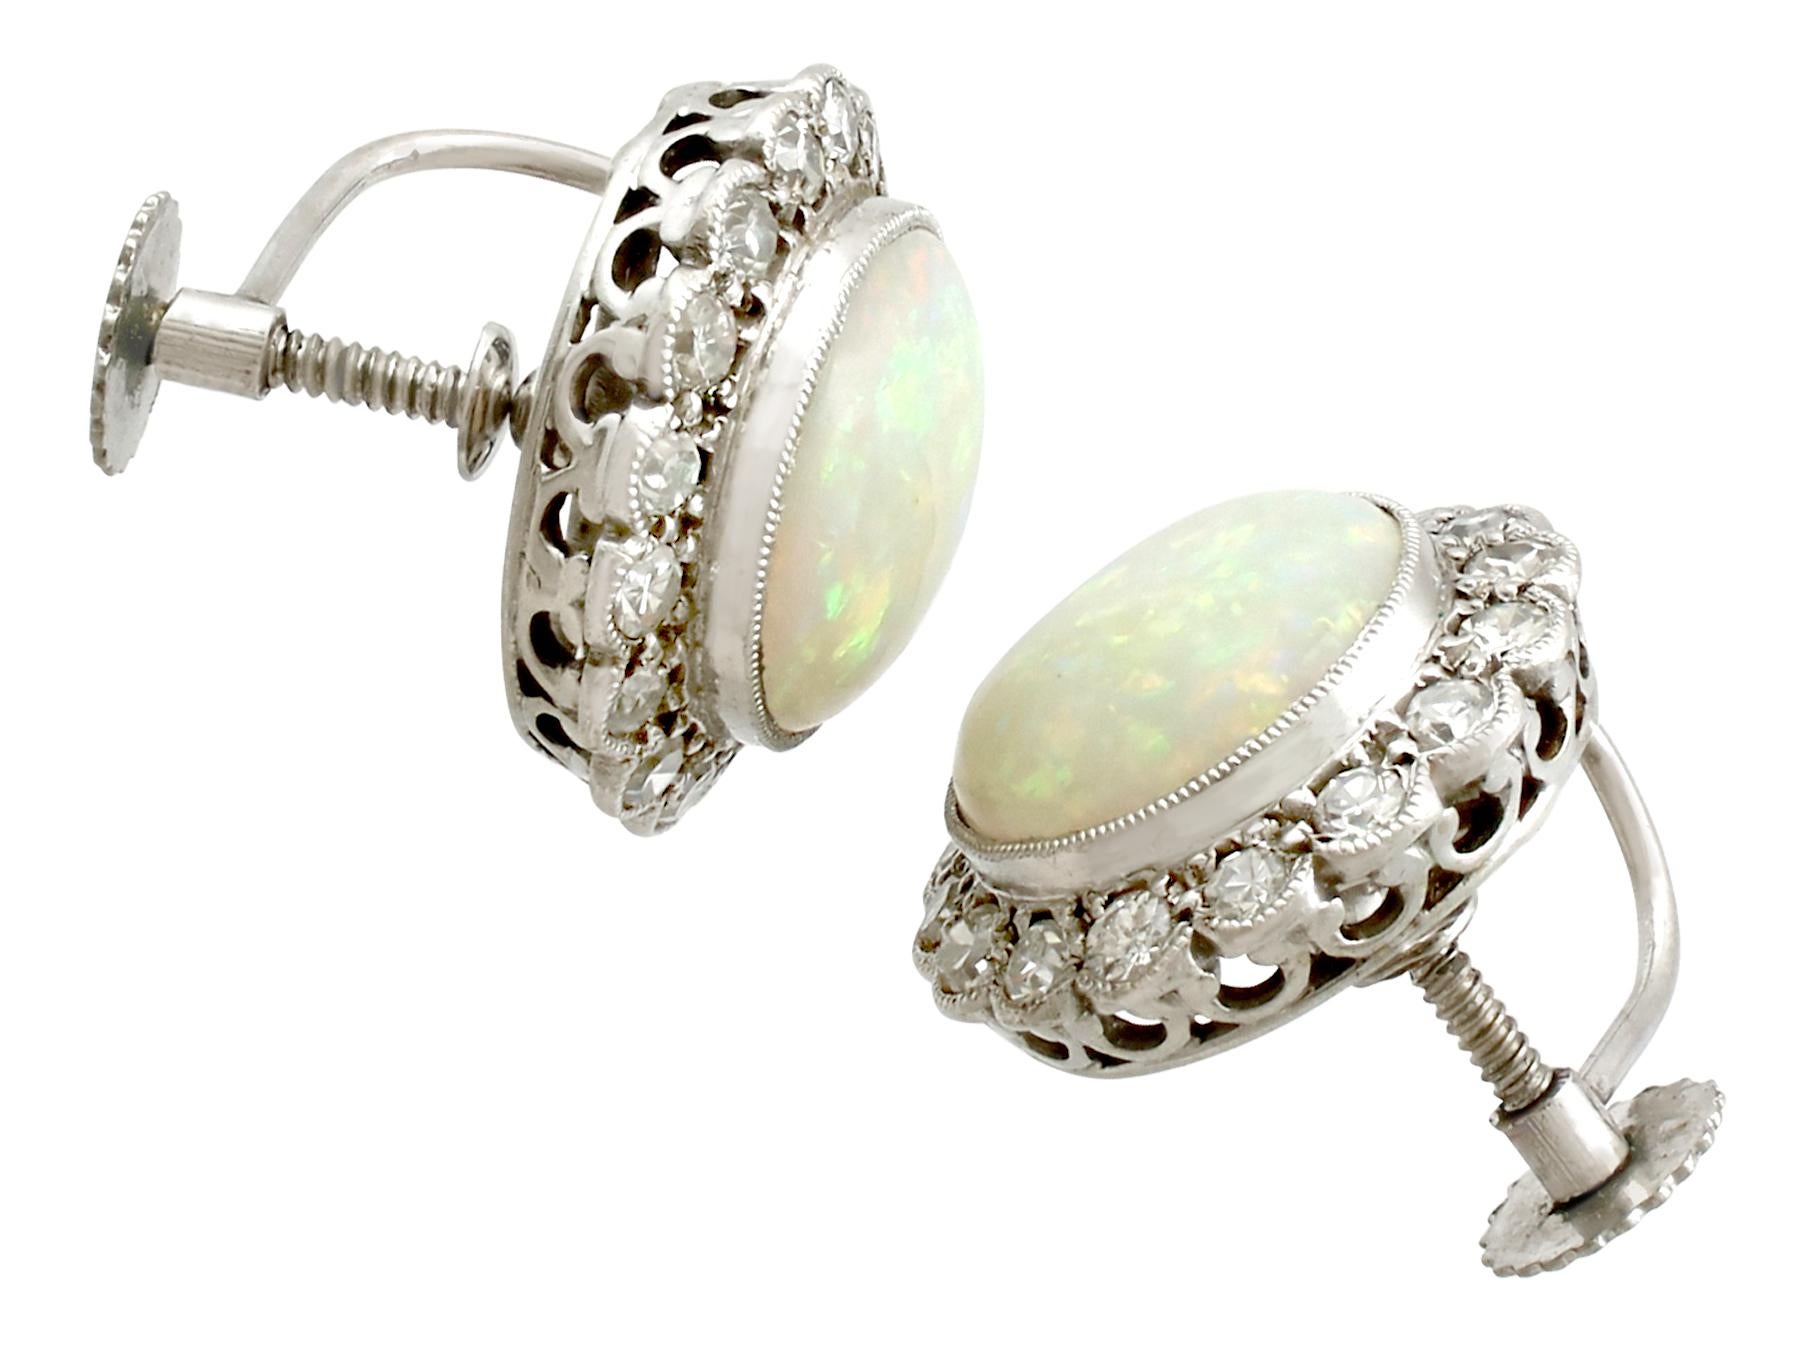 1920s 8.18 Carat Opal and Diamond Earring and Pendant Set For Sale 1